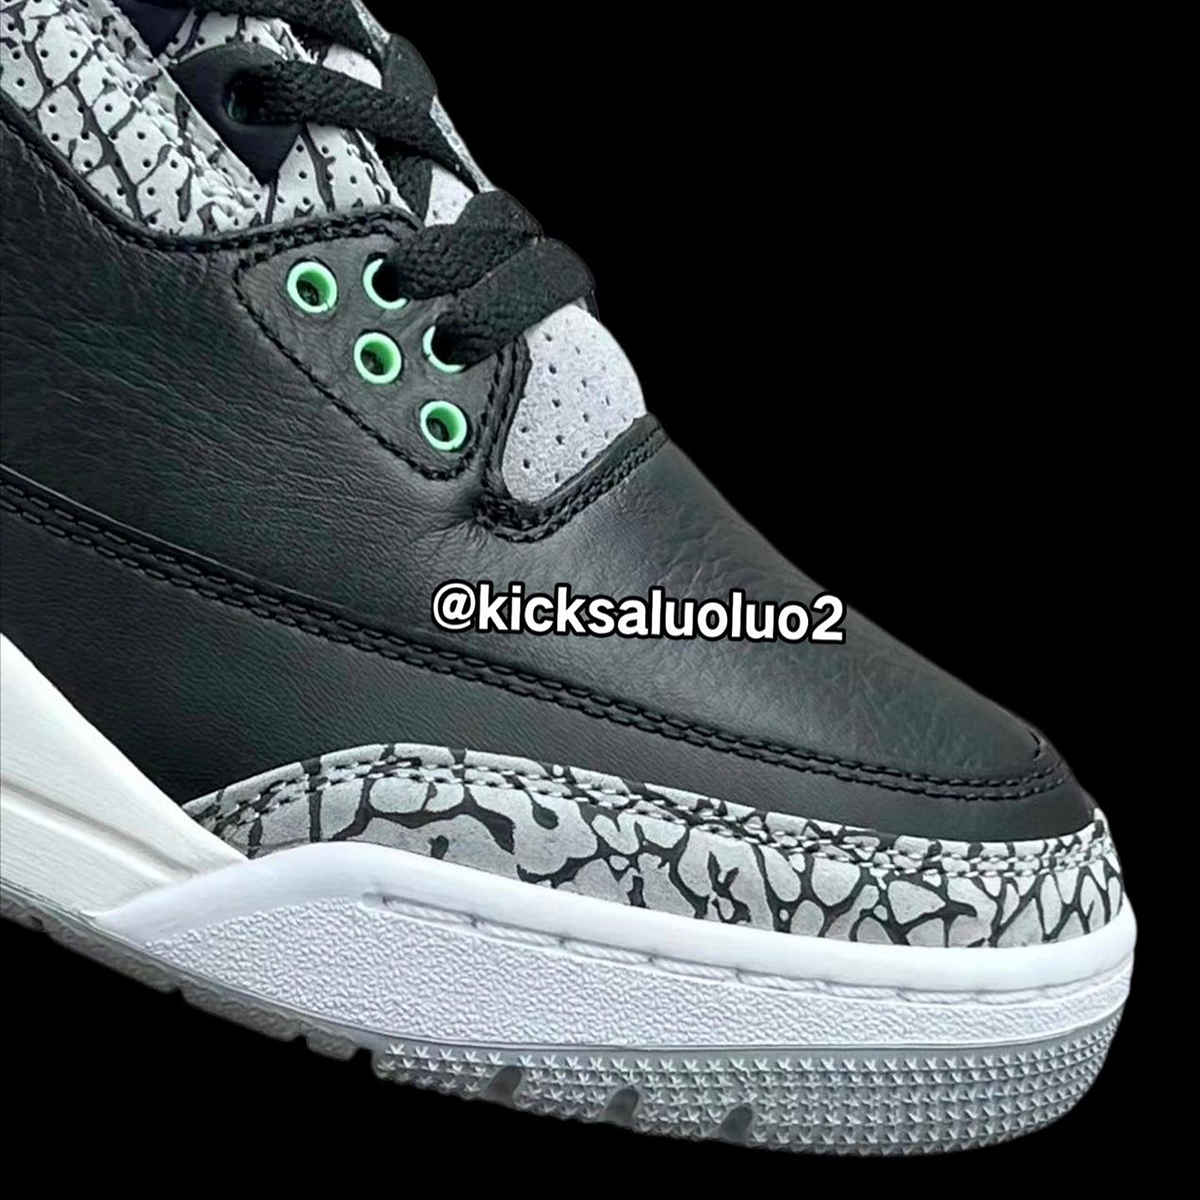 page to see what else Jordan Brand has on the way over the coming months Green Glow Ct8532 031 4